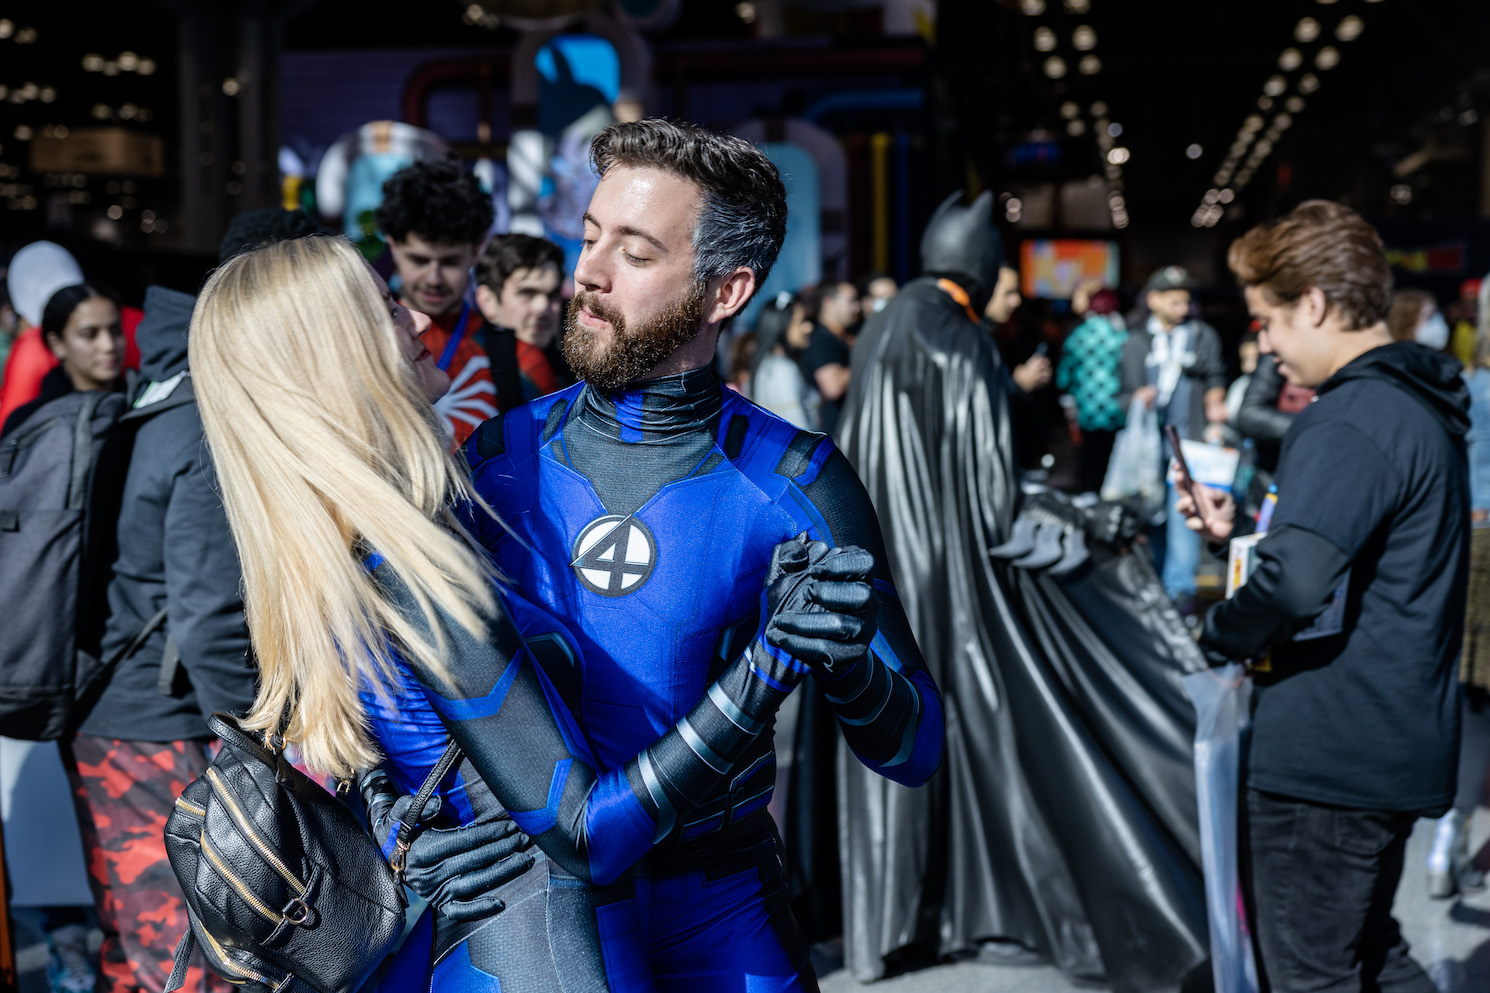 A bearded man in a blue bodysuit with the number four on his chest slow-dances with a blond woman in a matching bodysuit. The couple is dressed in Fantastic Four costumes.